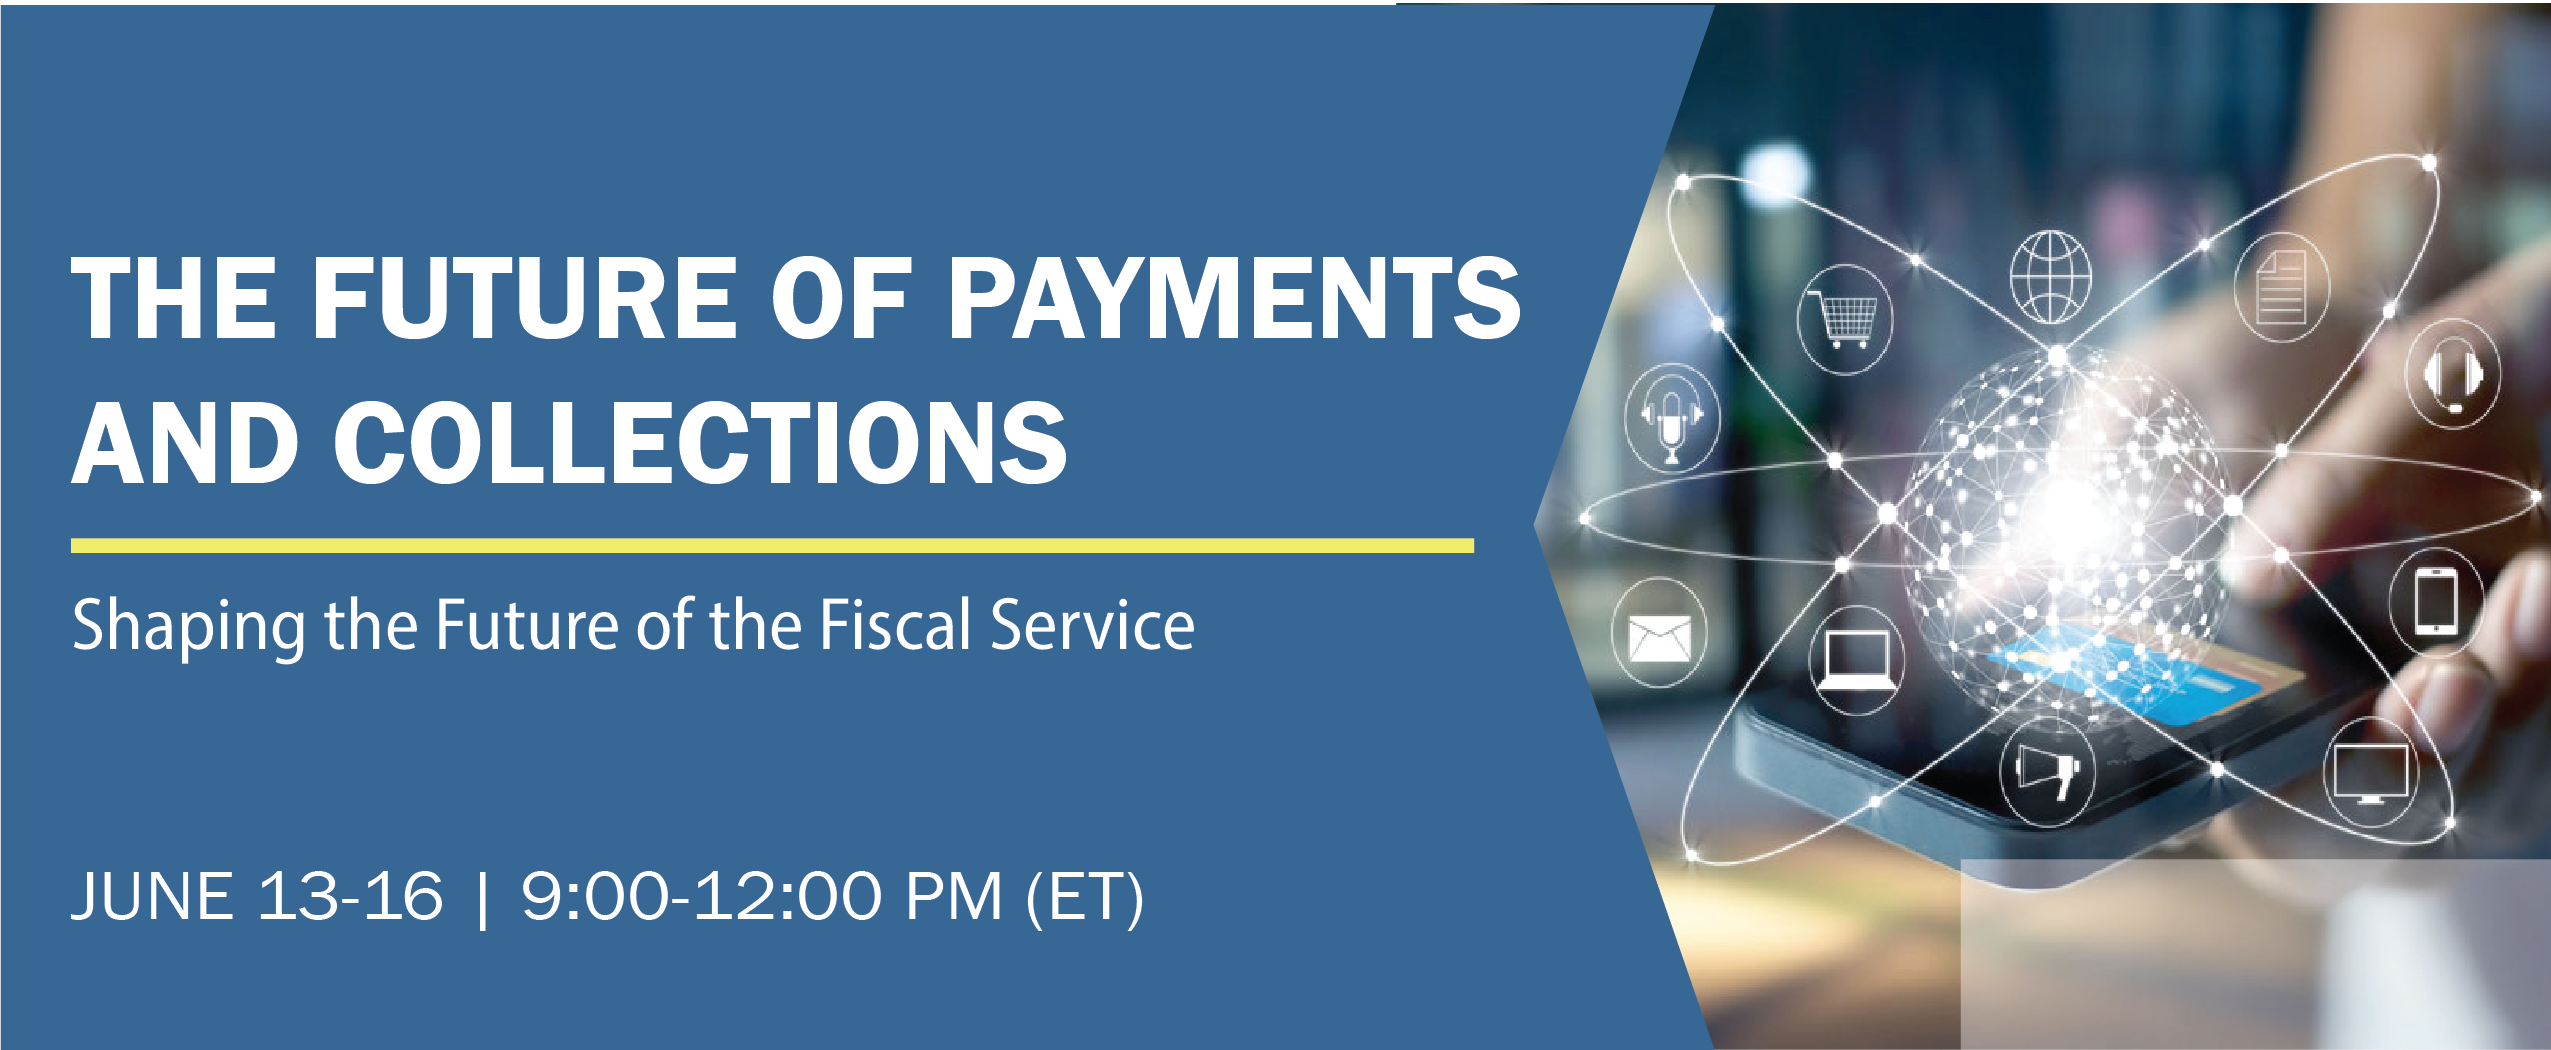 The Future of Payments and Collections:  Shaping the Future of the Fiscal Service
June 13-16, 2022  9:00-12:00 ET